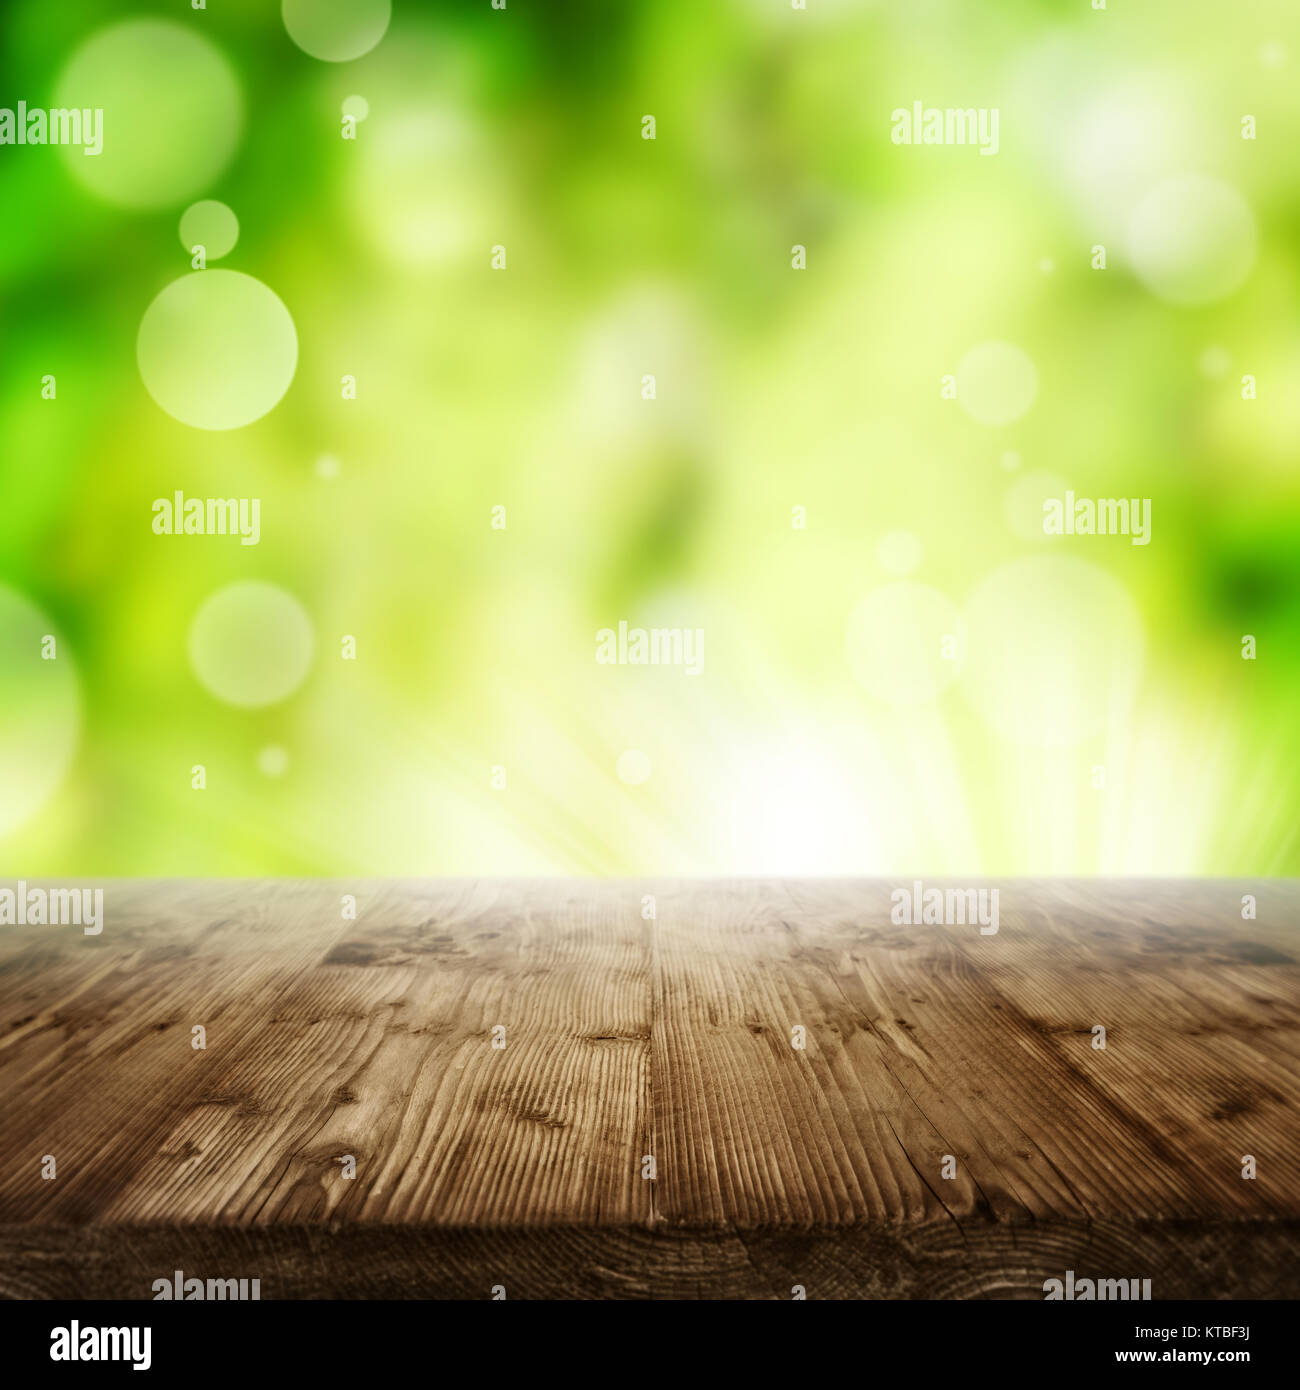 Abstract radiant green spring background with empty wooden table for a concept Stock Photo